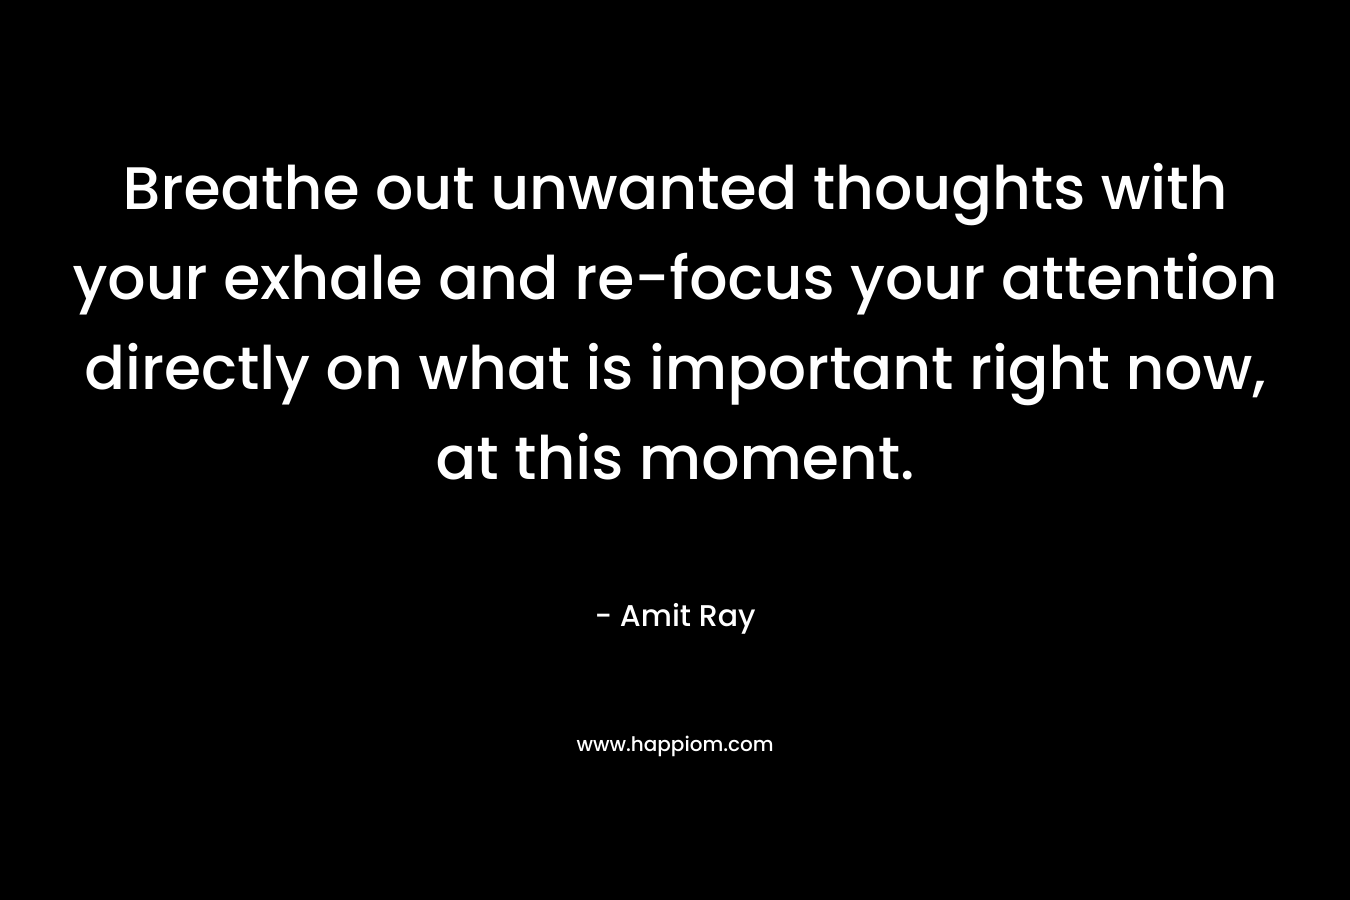 Breathe out unwanted thoughts with your exhale and re-focus your attention directly on what is important right now, at this moment.